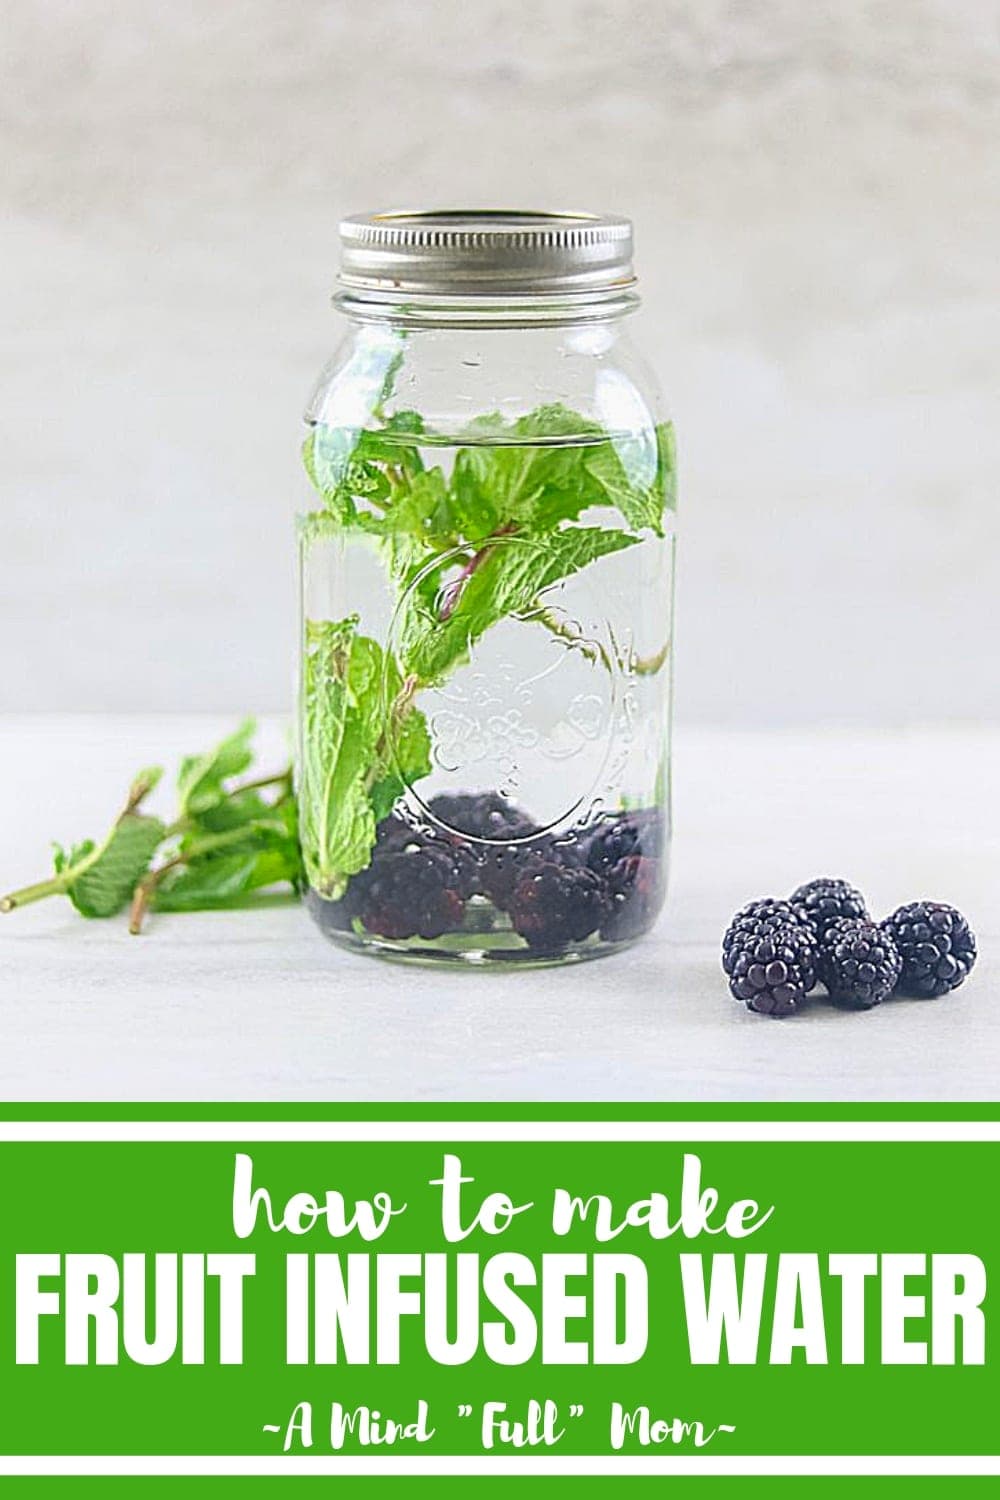 Replace sodas and sugary drinks with one of these easy recipes for infused water for a flavorful, hydrating, healthy drink! These 4 delicious combinations of vegetables, fruits, and herbs will make drinking water a pleasure rather than a chore!